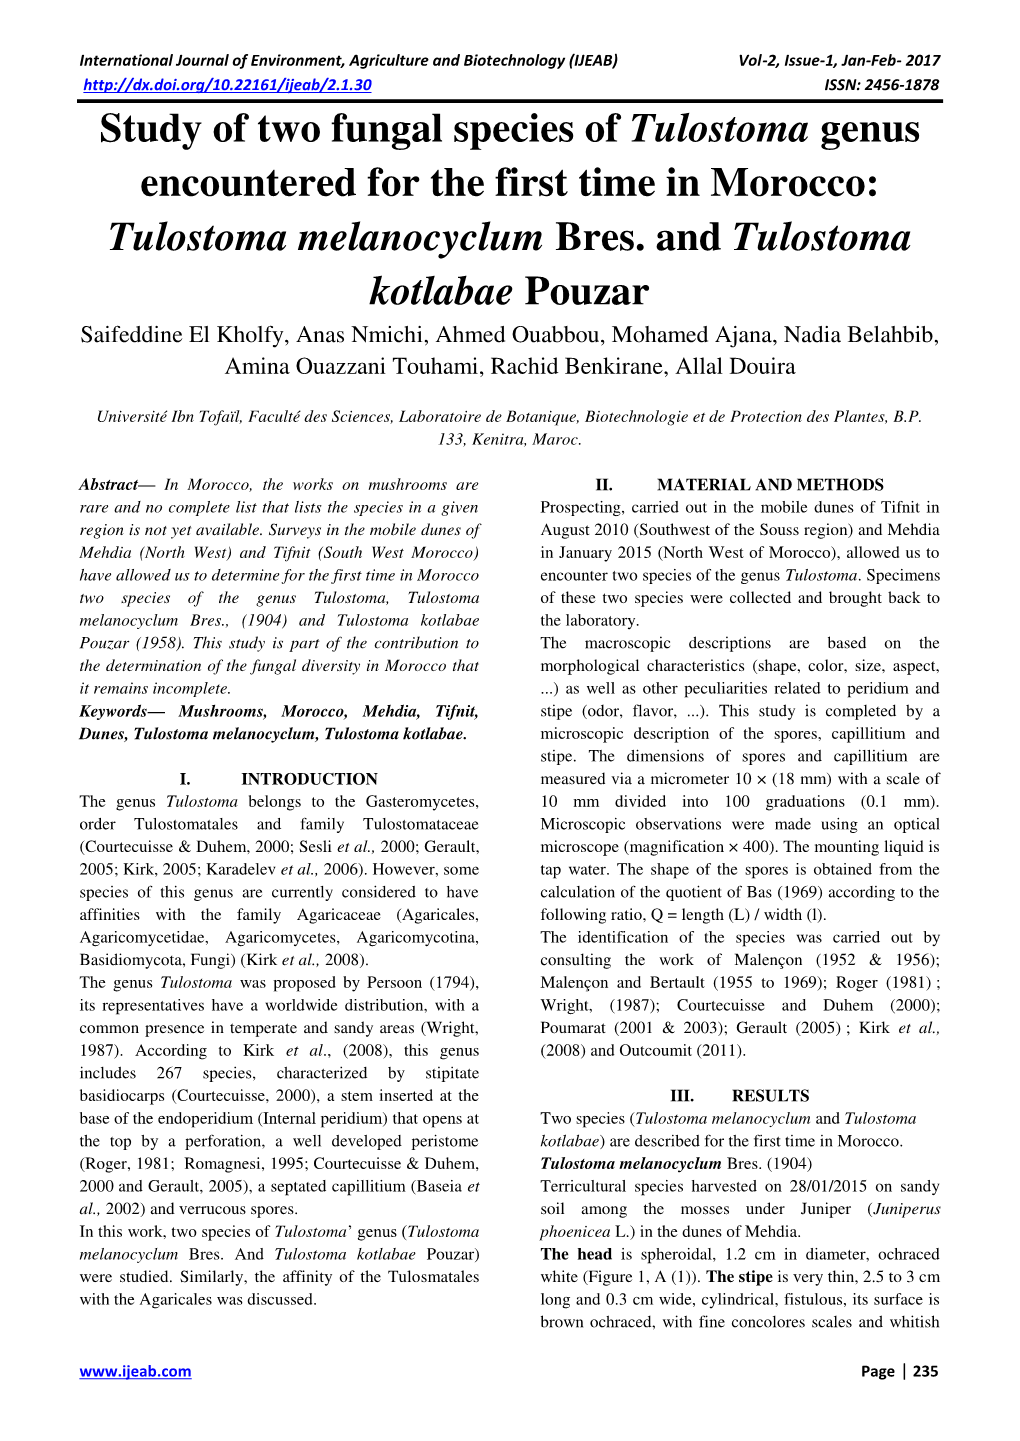 Study of Two Fungal Species of Tulostoma Genus Encountered for the First Time in Morocco: Tulostoma Melanocyclum Bres